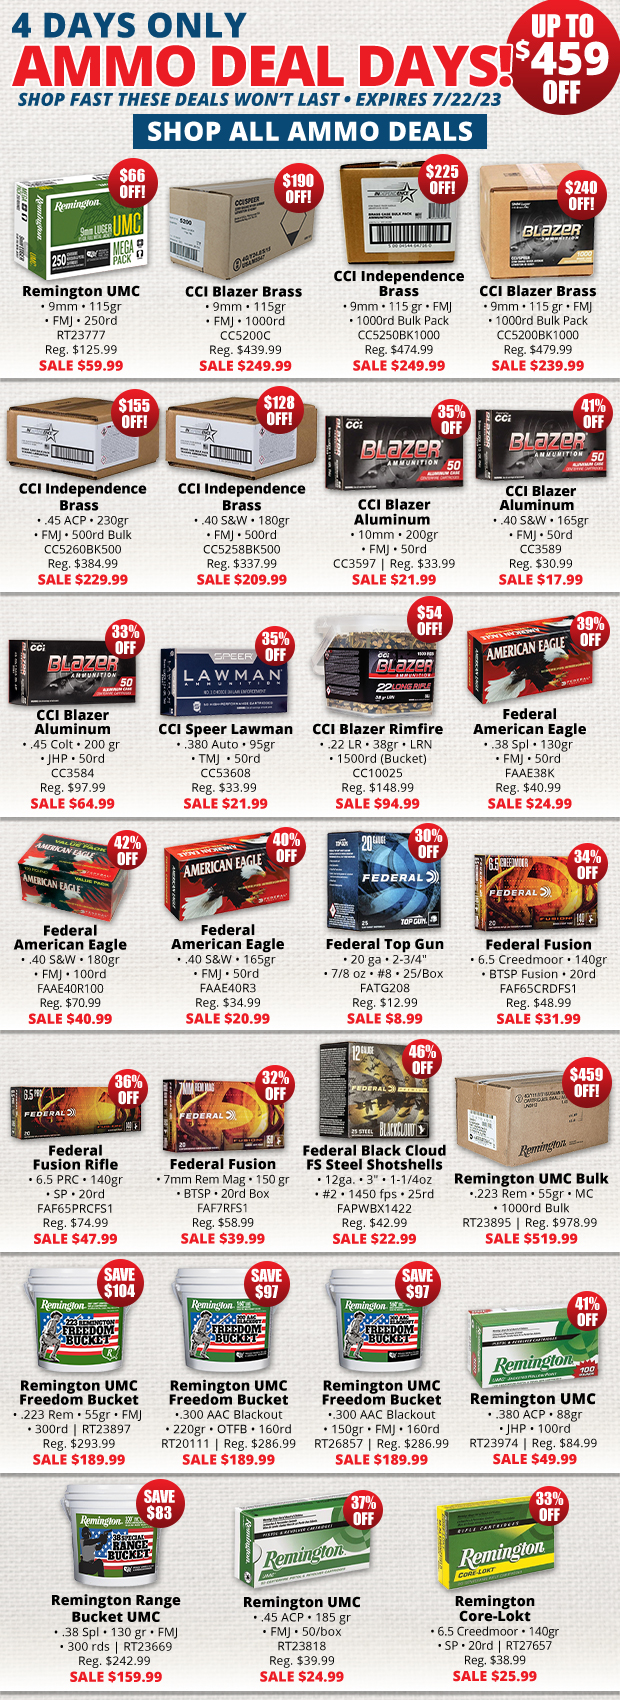 Up to $459 Off with Ammo Deal Days!